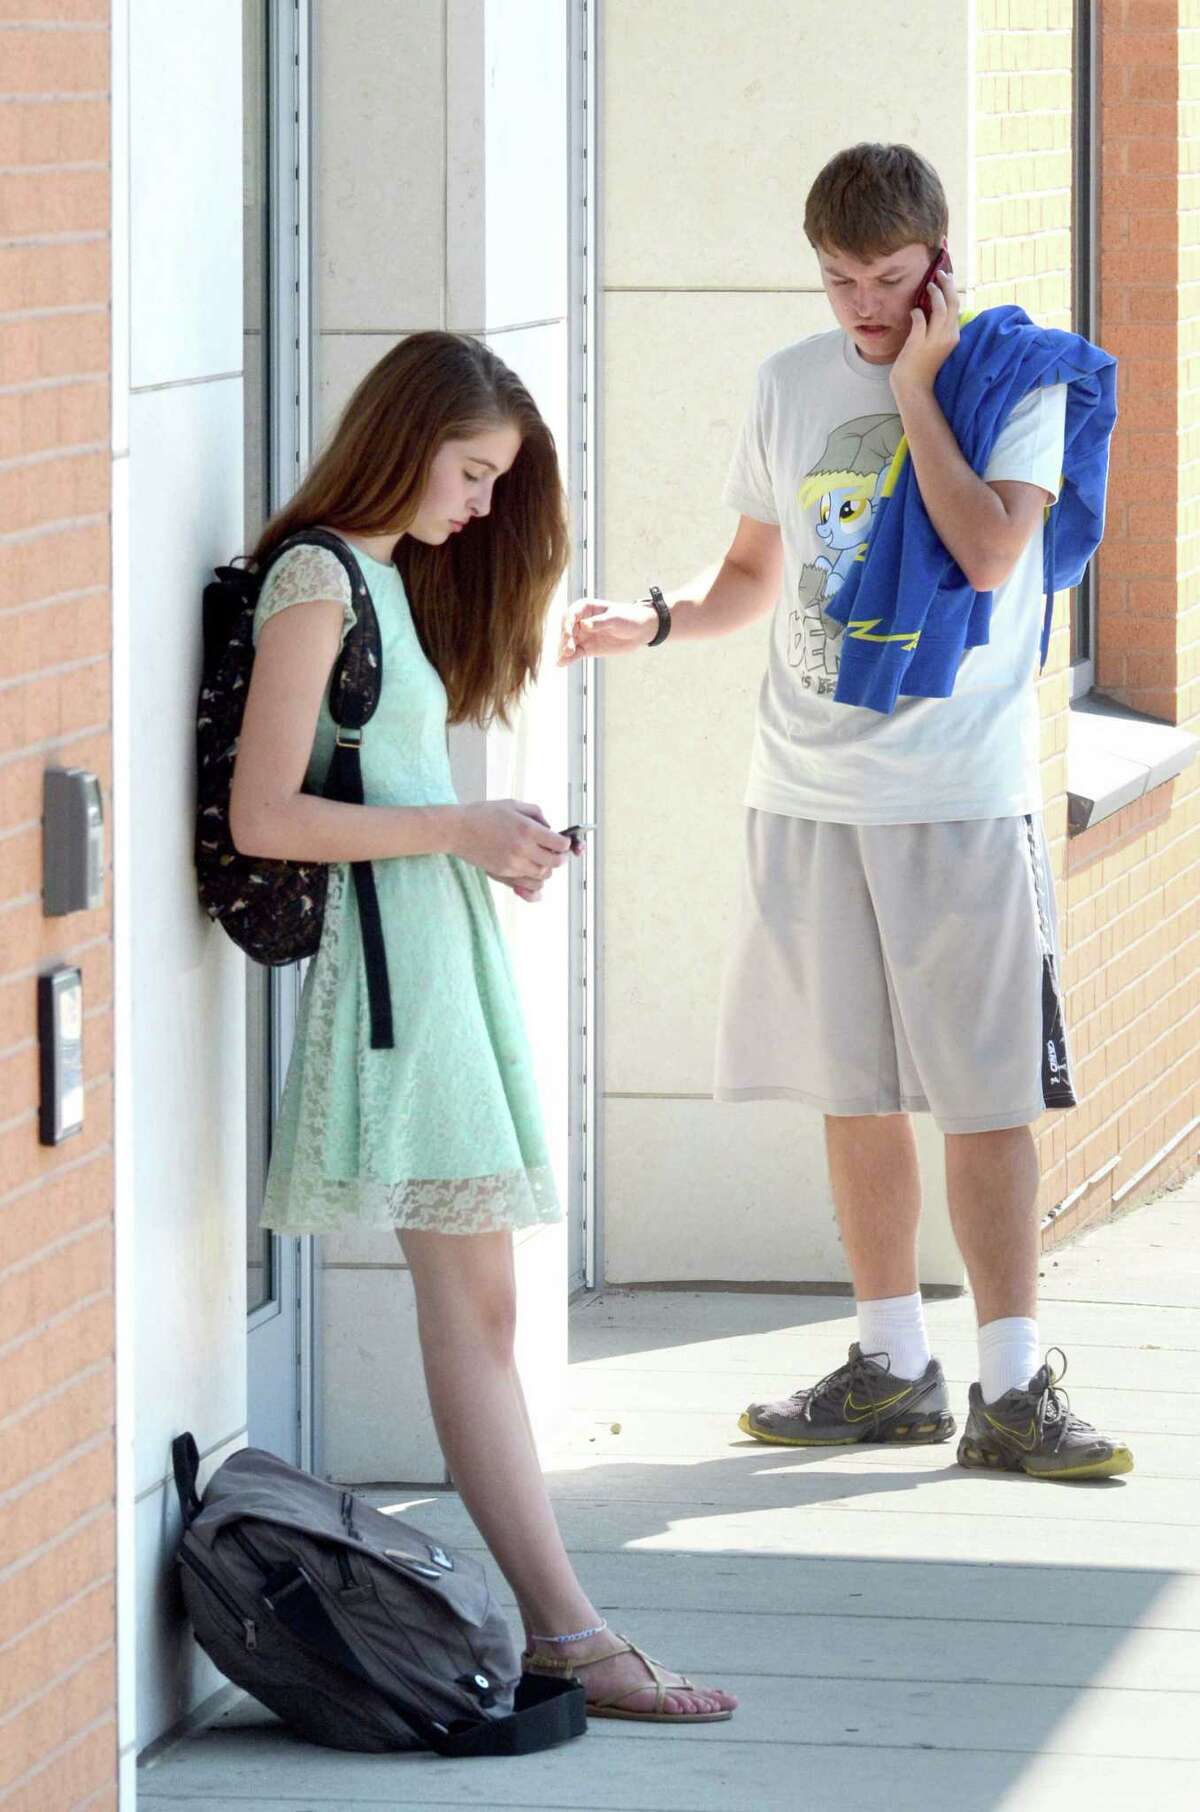 Coop High School Tenth graders Ilana Zsigmond and Tyler Ambrose, both of Hamden use their phones after school August 31, 2012 on College Ave in New Haven. vmWilliams